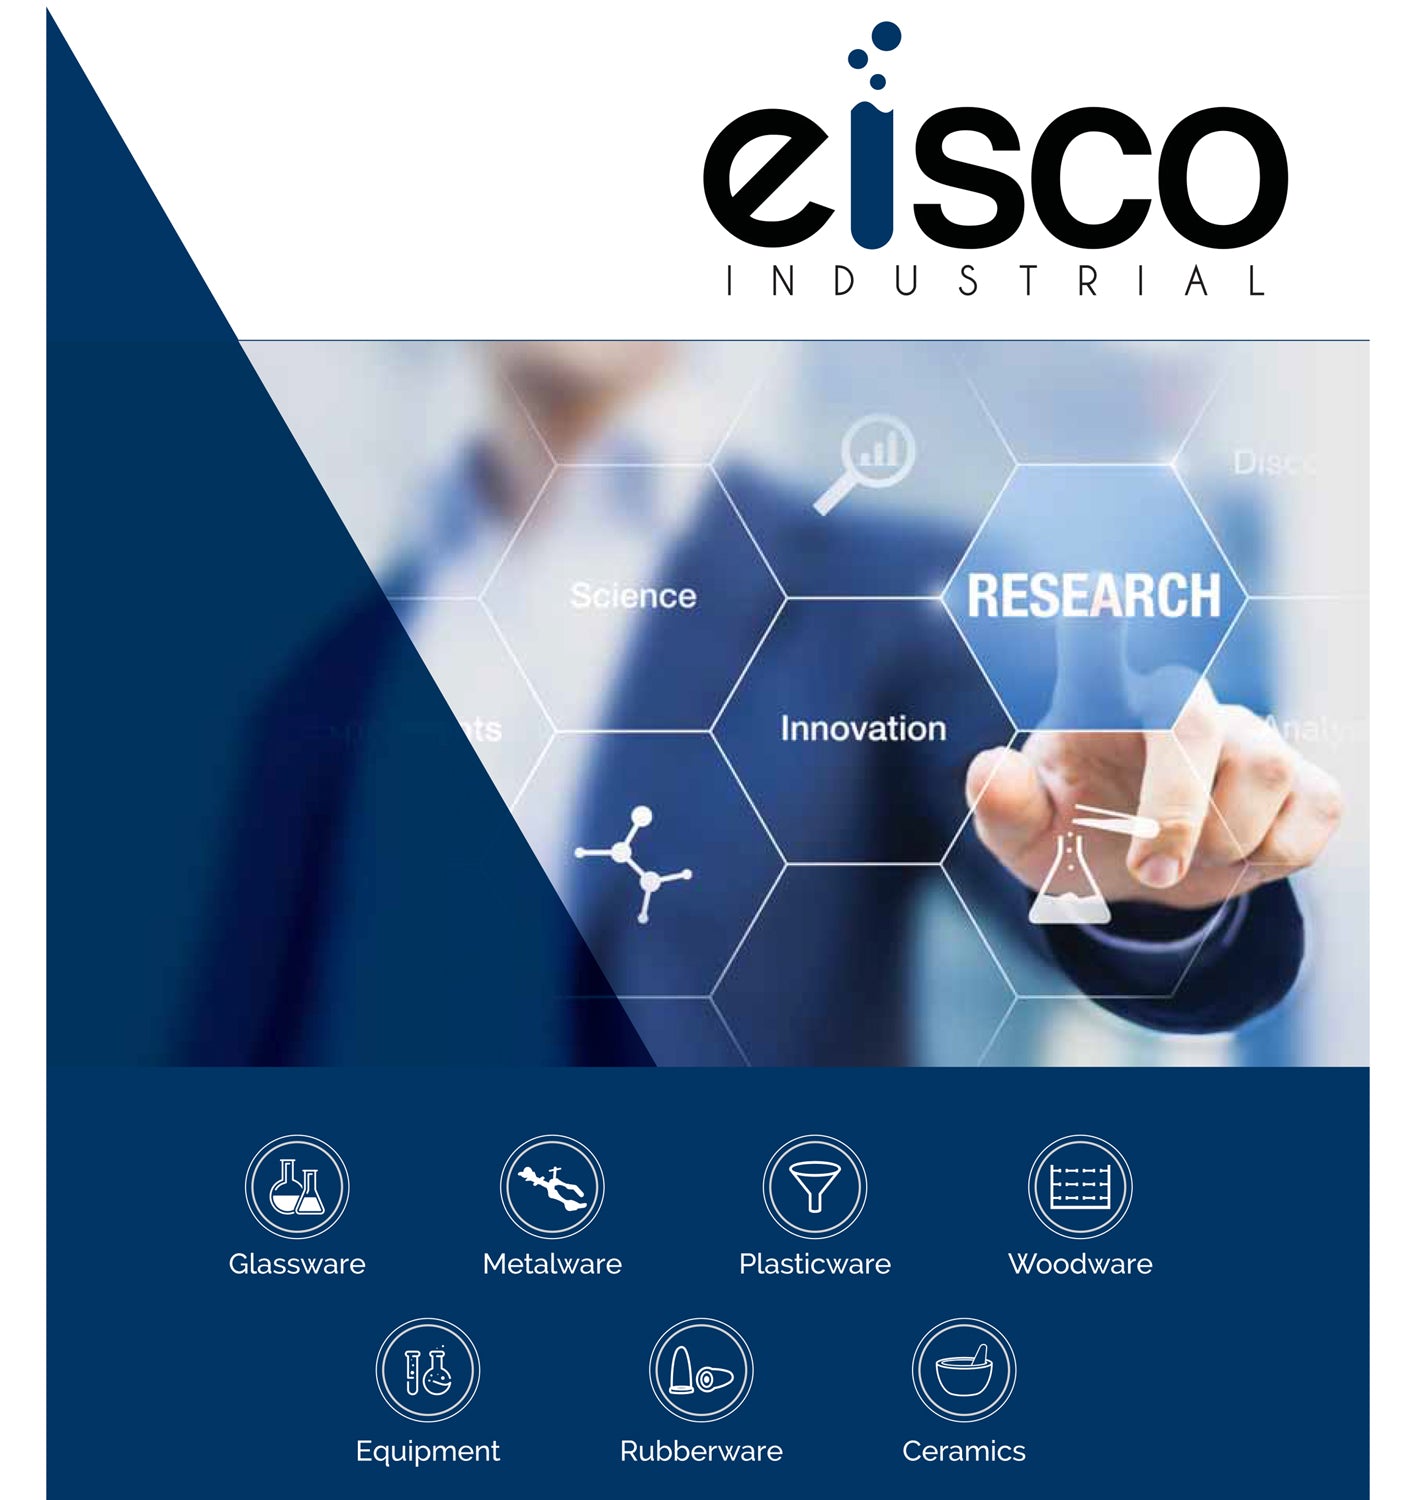 Eisco Industrial catalog now available